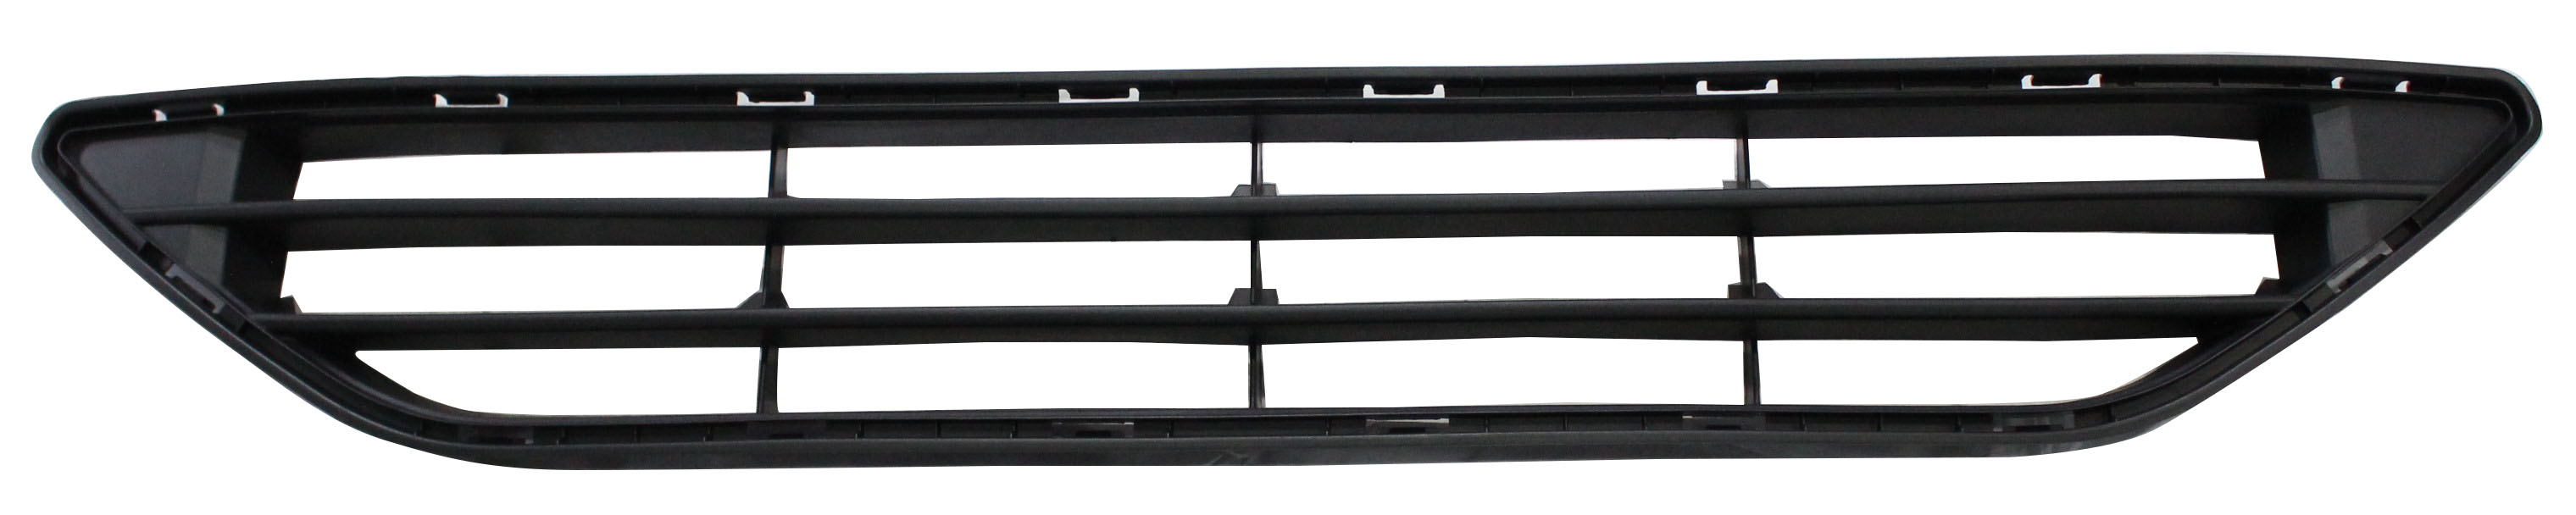 Aftermarket GRILLES for NISSAN - ROGUE, ROGUE,17-20,Front bumper grille